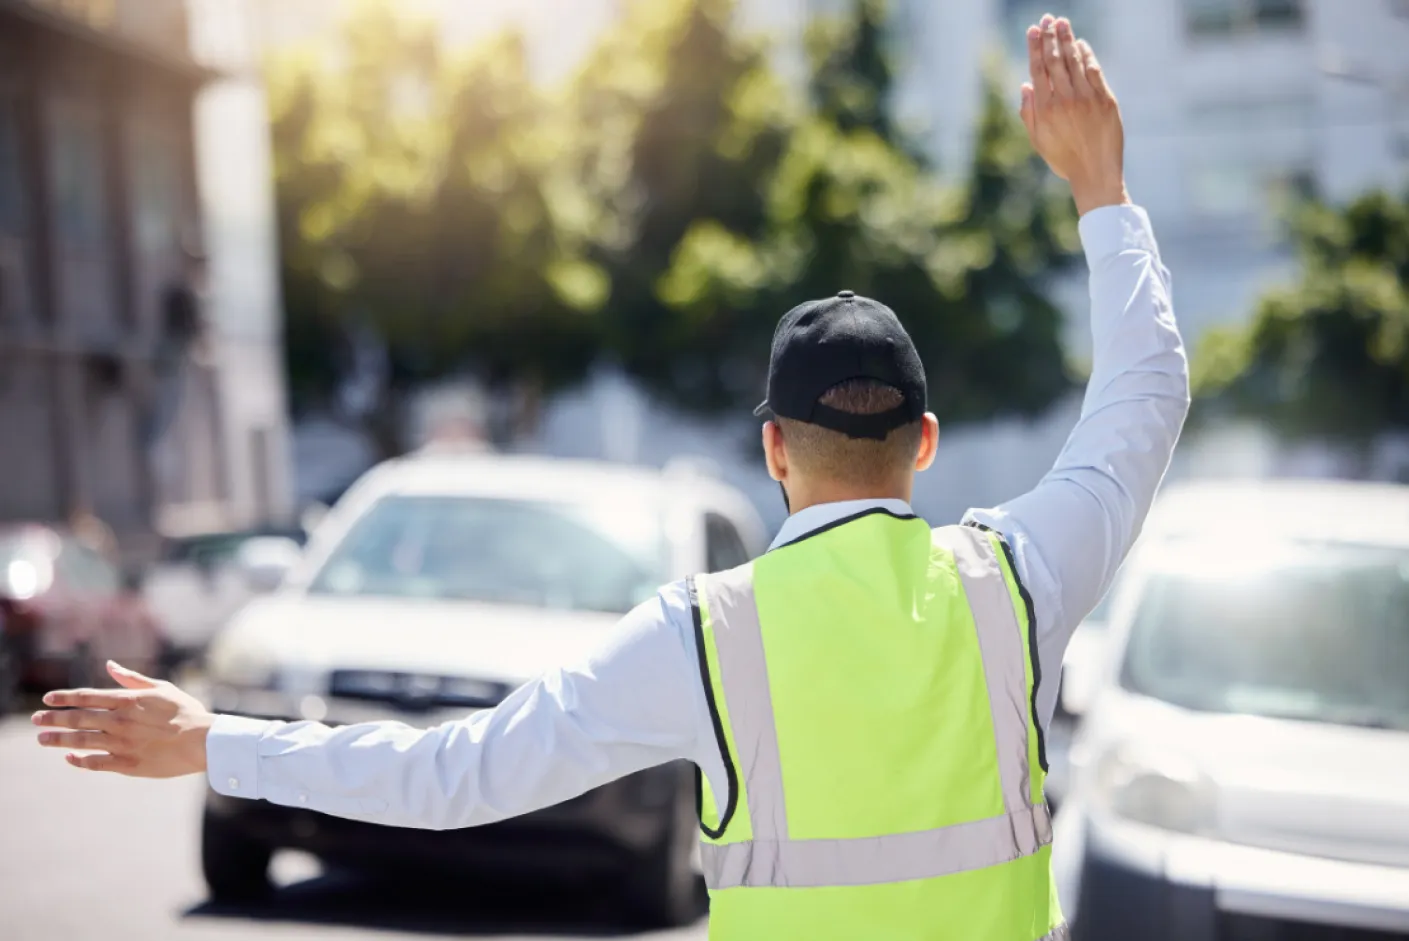 Here is Study guide of the traffic marshal test questions in the United Kingdom